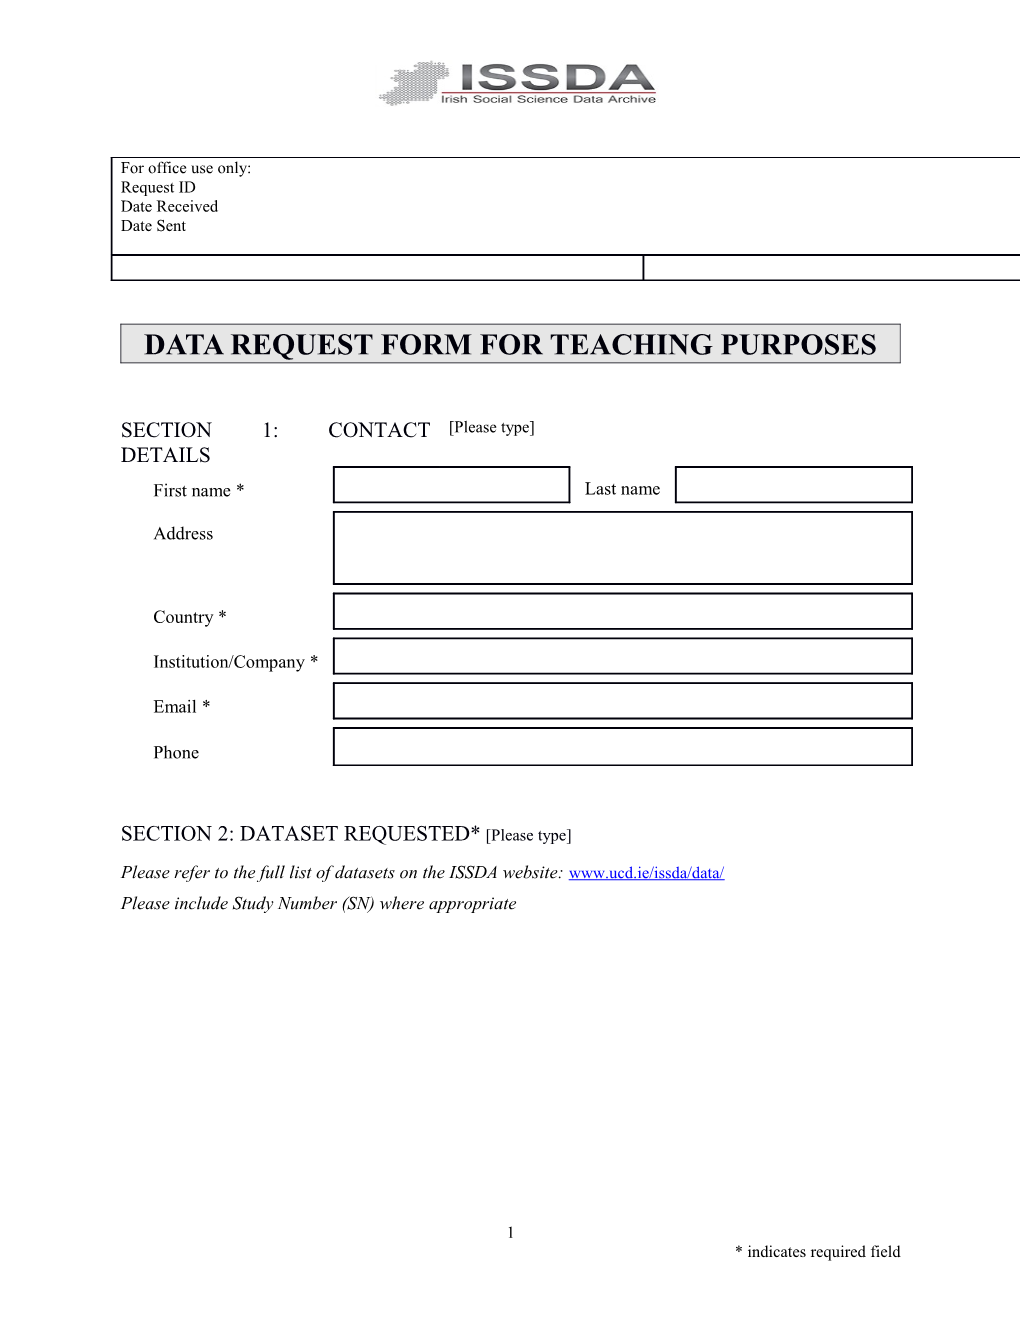 Data Request Form for Teaching Purposes